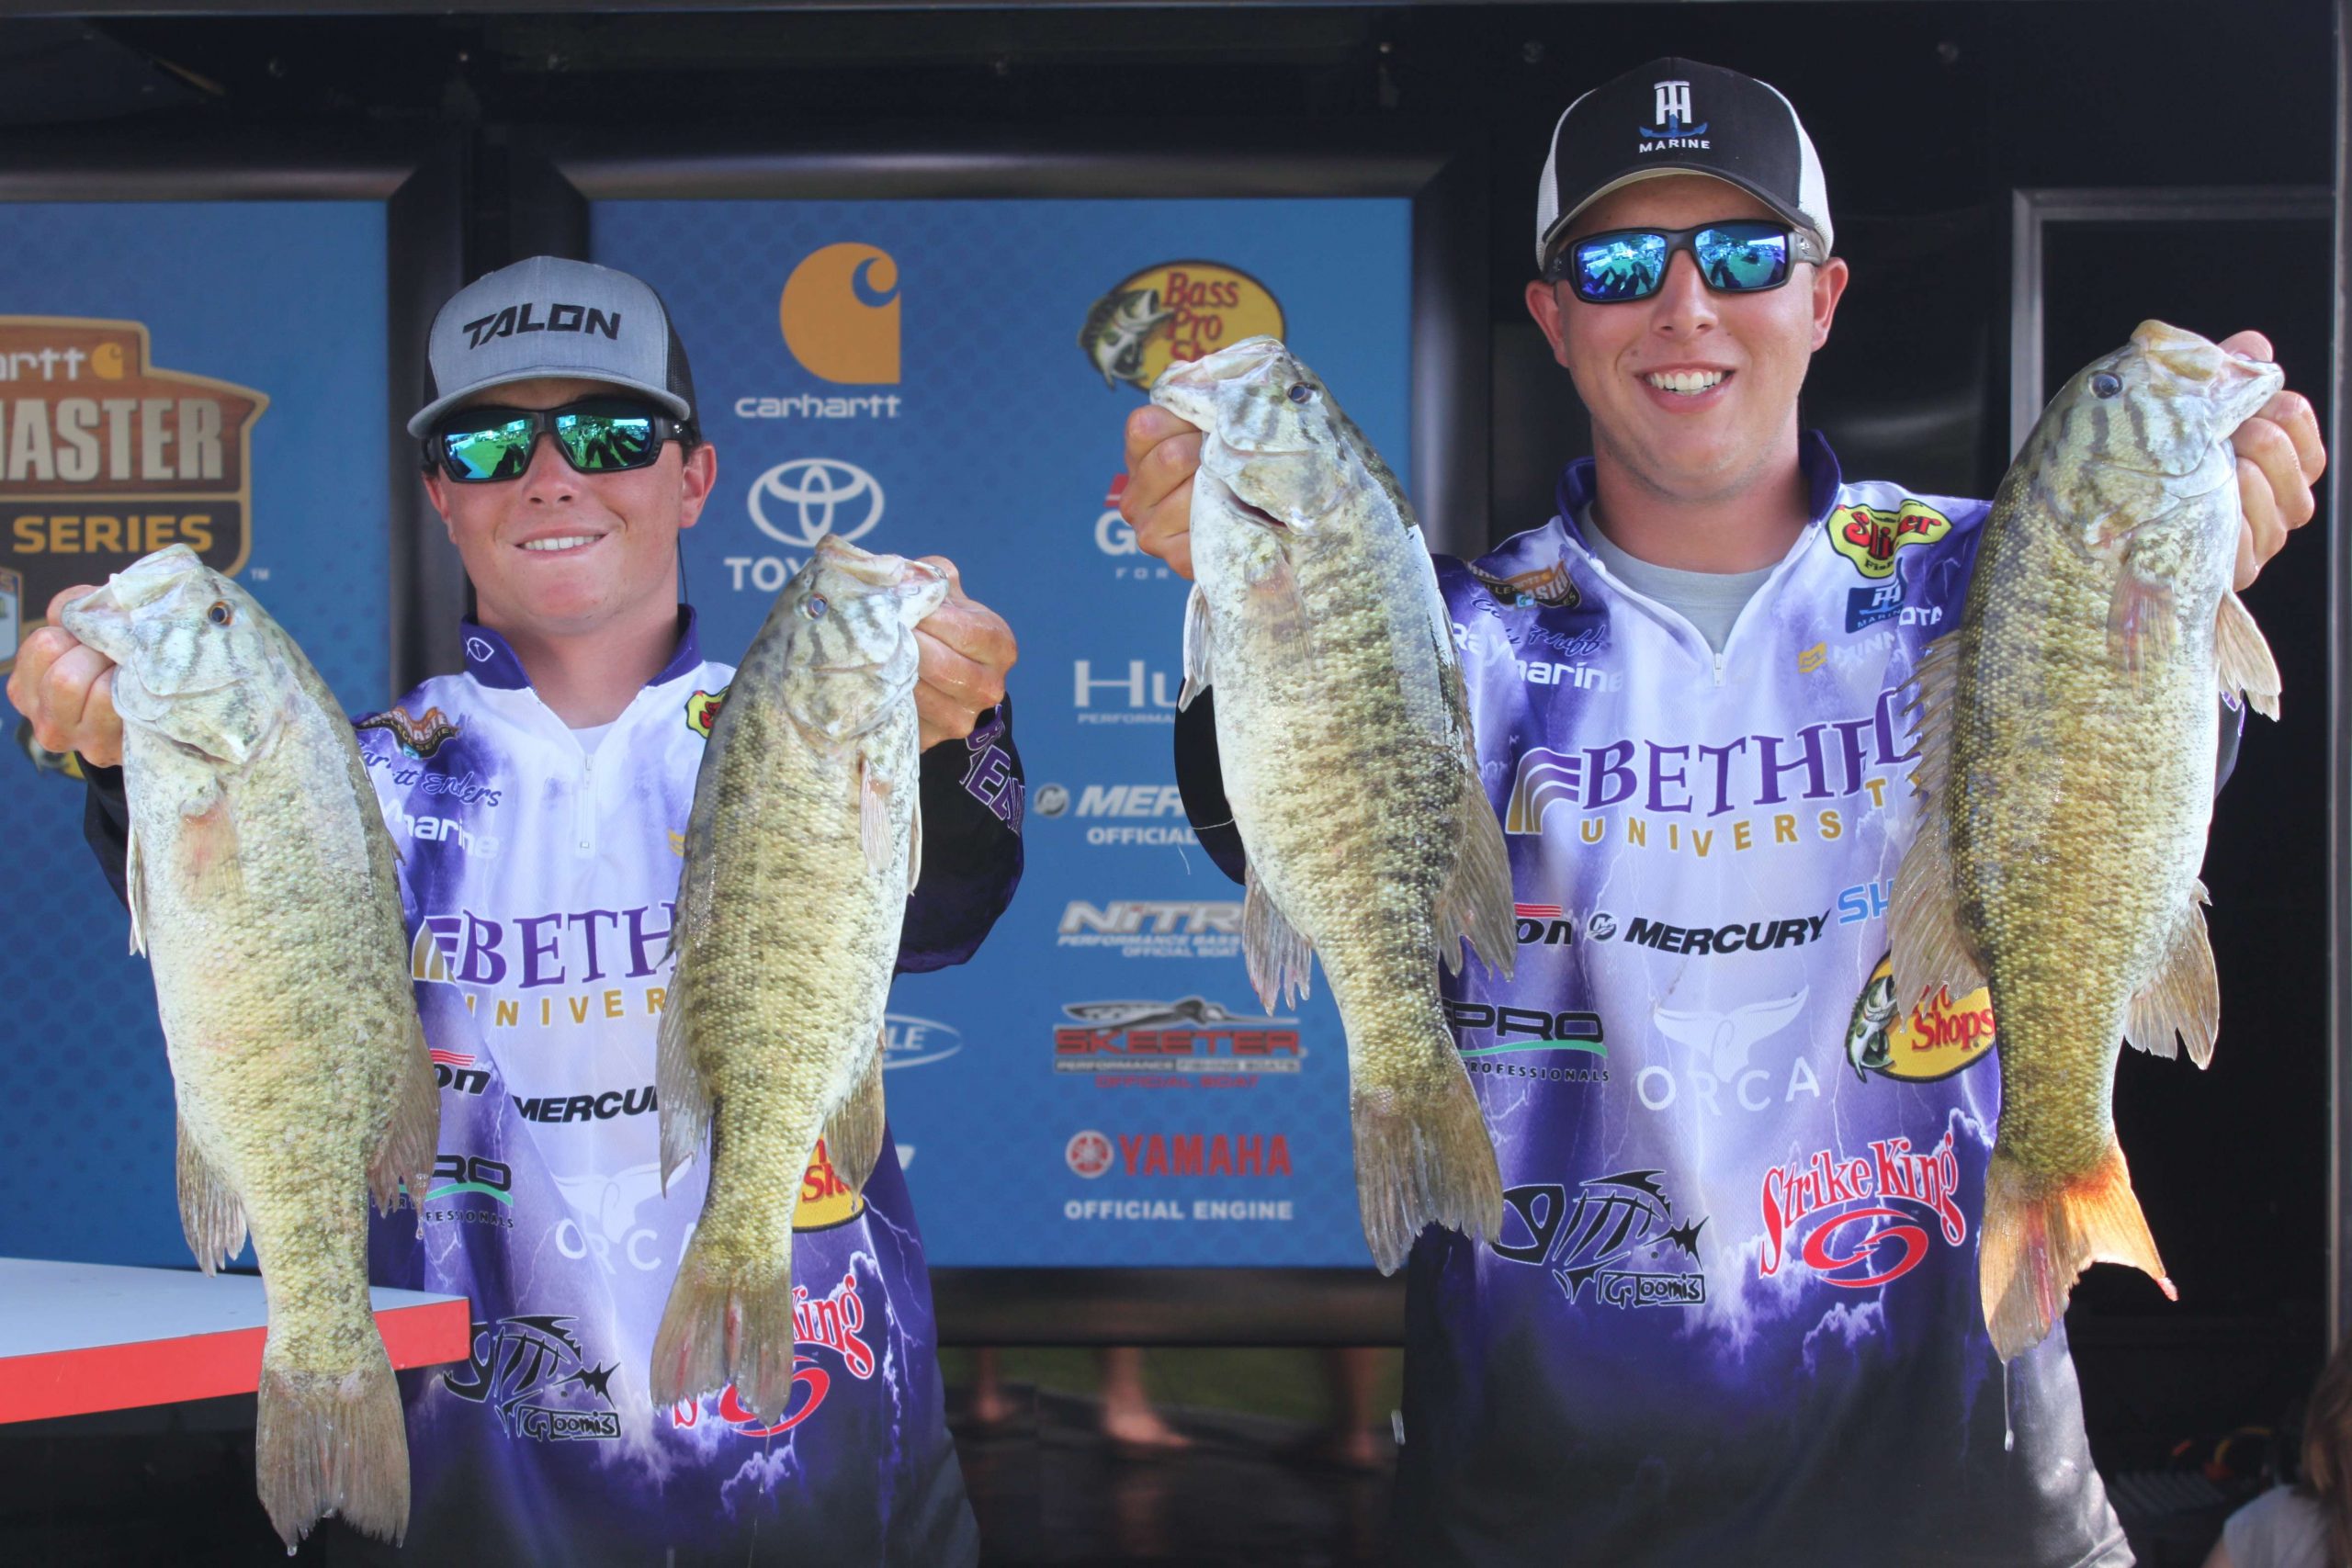 Garrett Enders and Cody Huff of Bethel are in 15th place with 25-10.